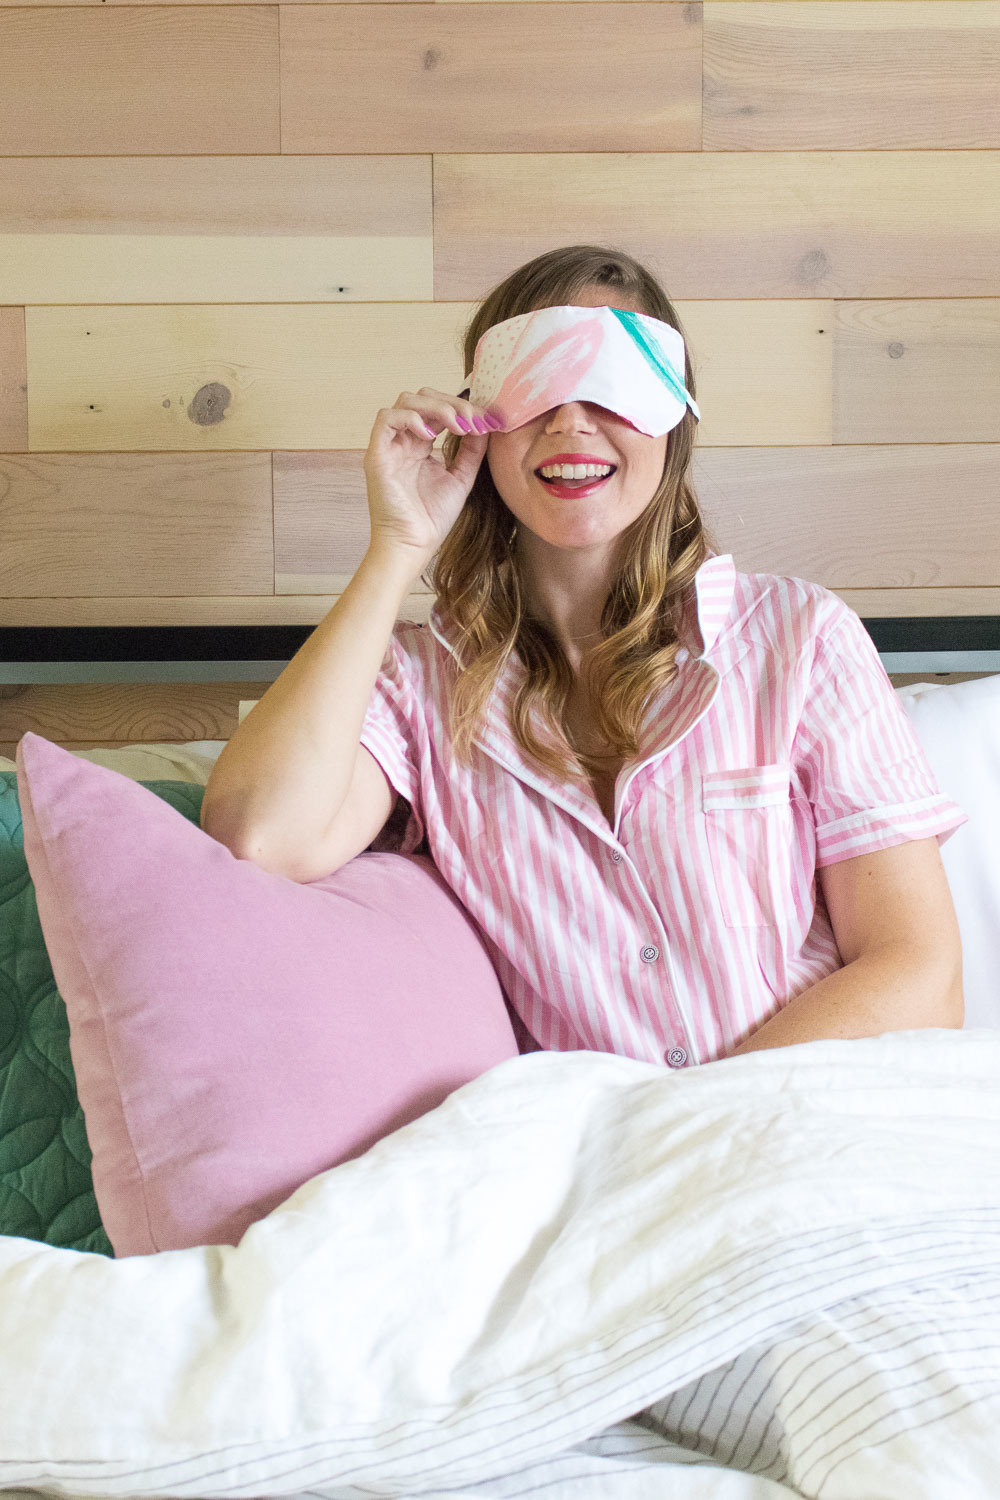 Woman sitting in bed with an eye mask on.